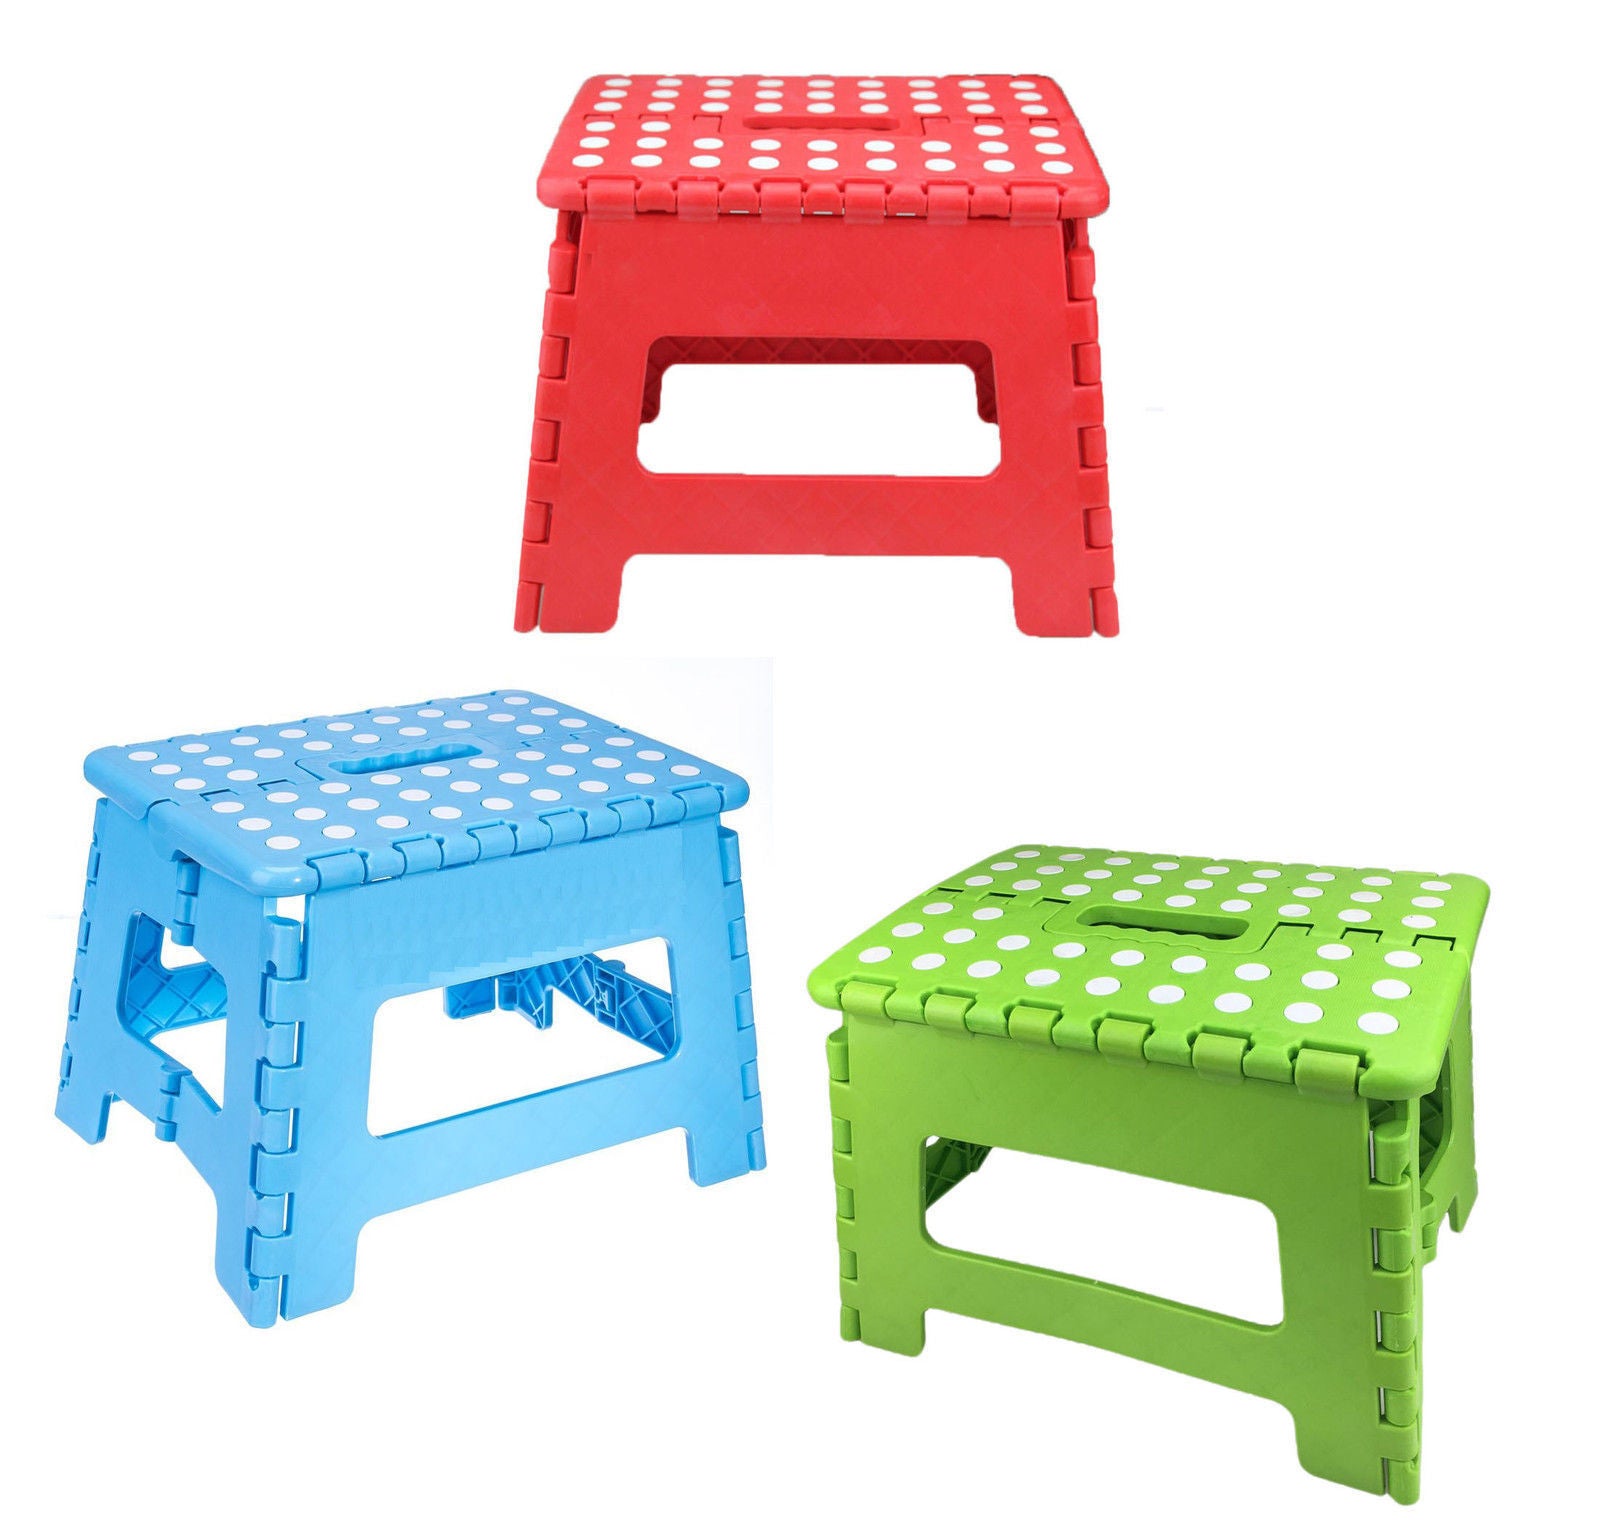 Home Folding Step Stool For Kids Adults 12" Heavy Duty Plastic Stool With Handle